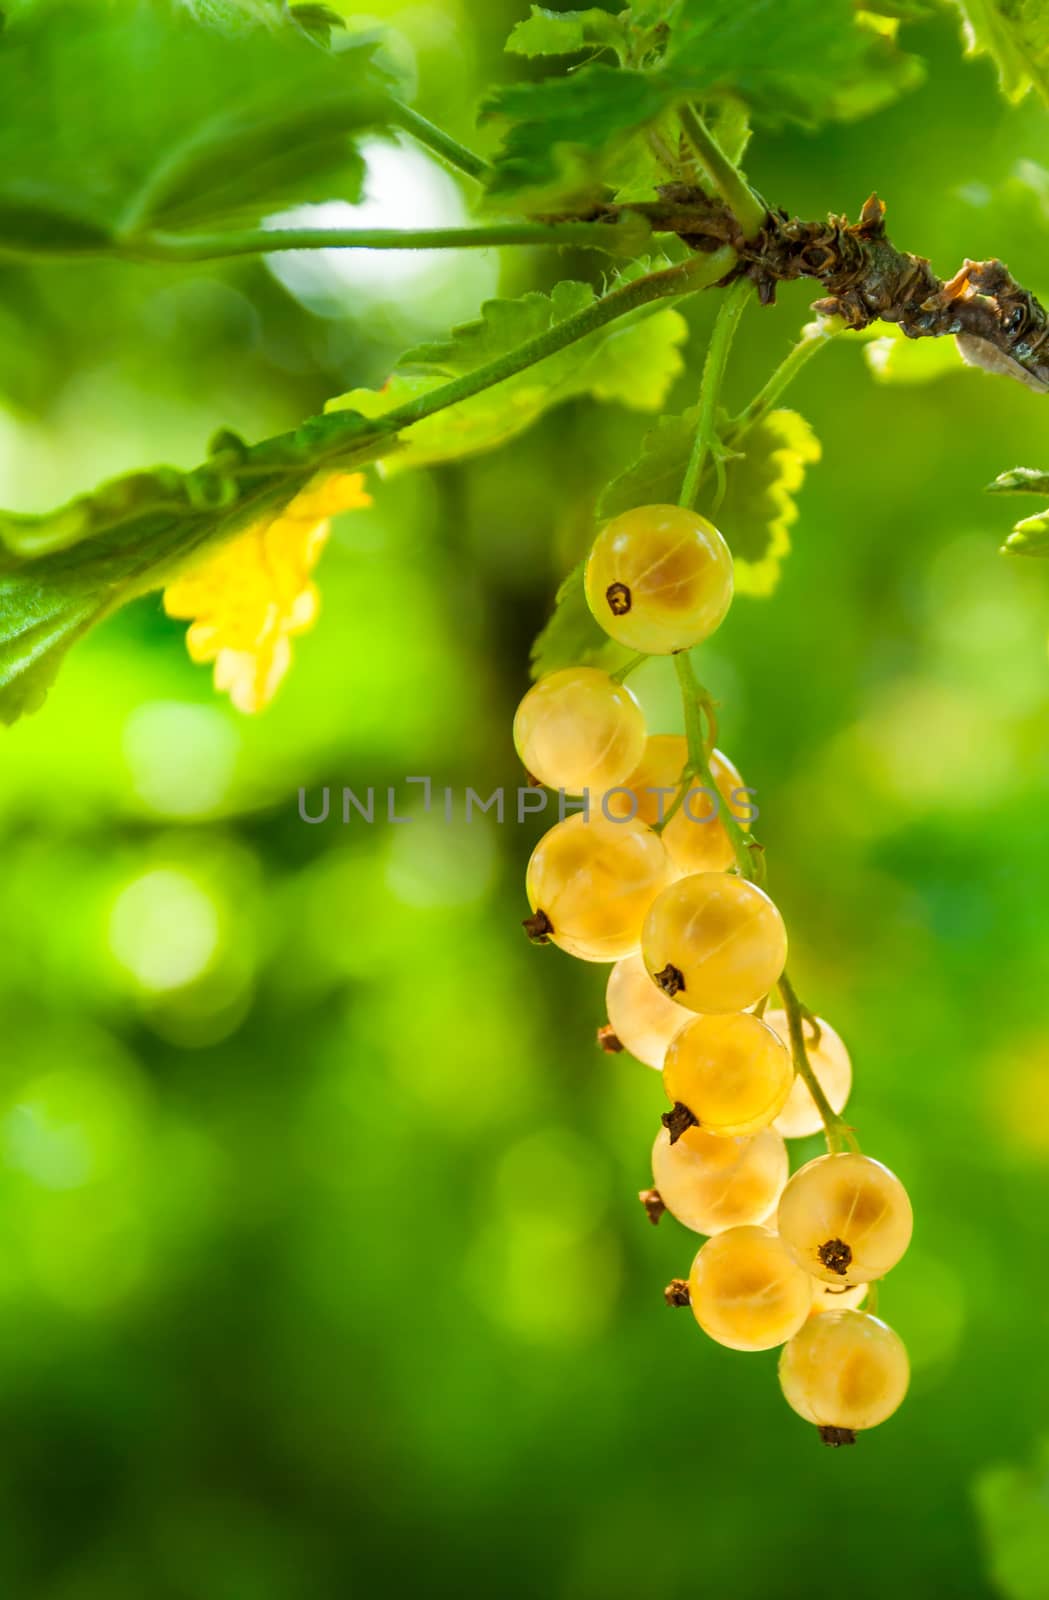 fresh young sprout of white currant on a green background of blurred foliage